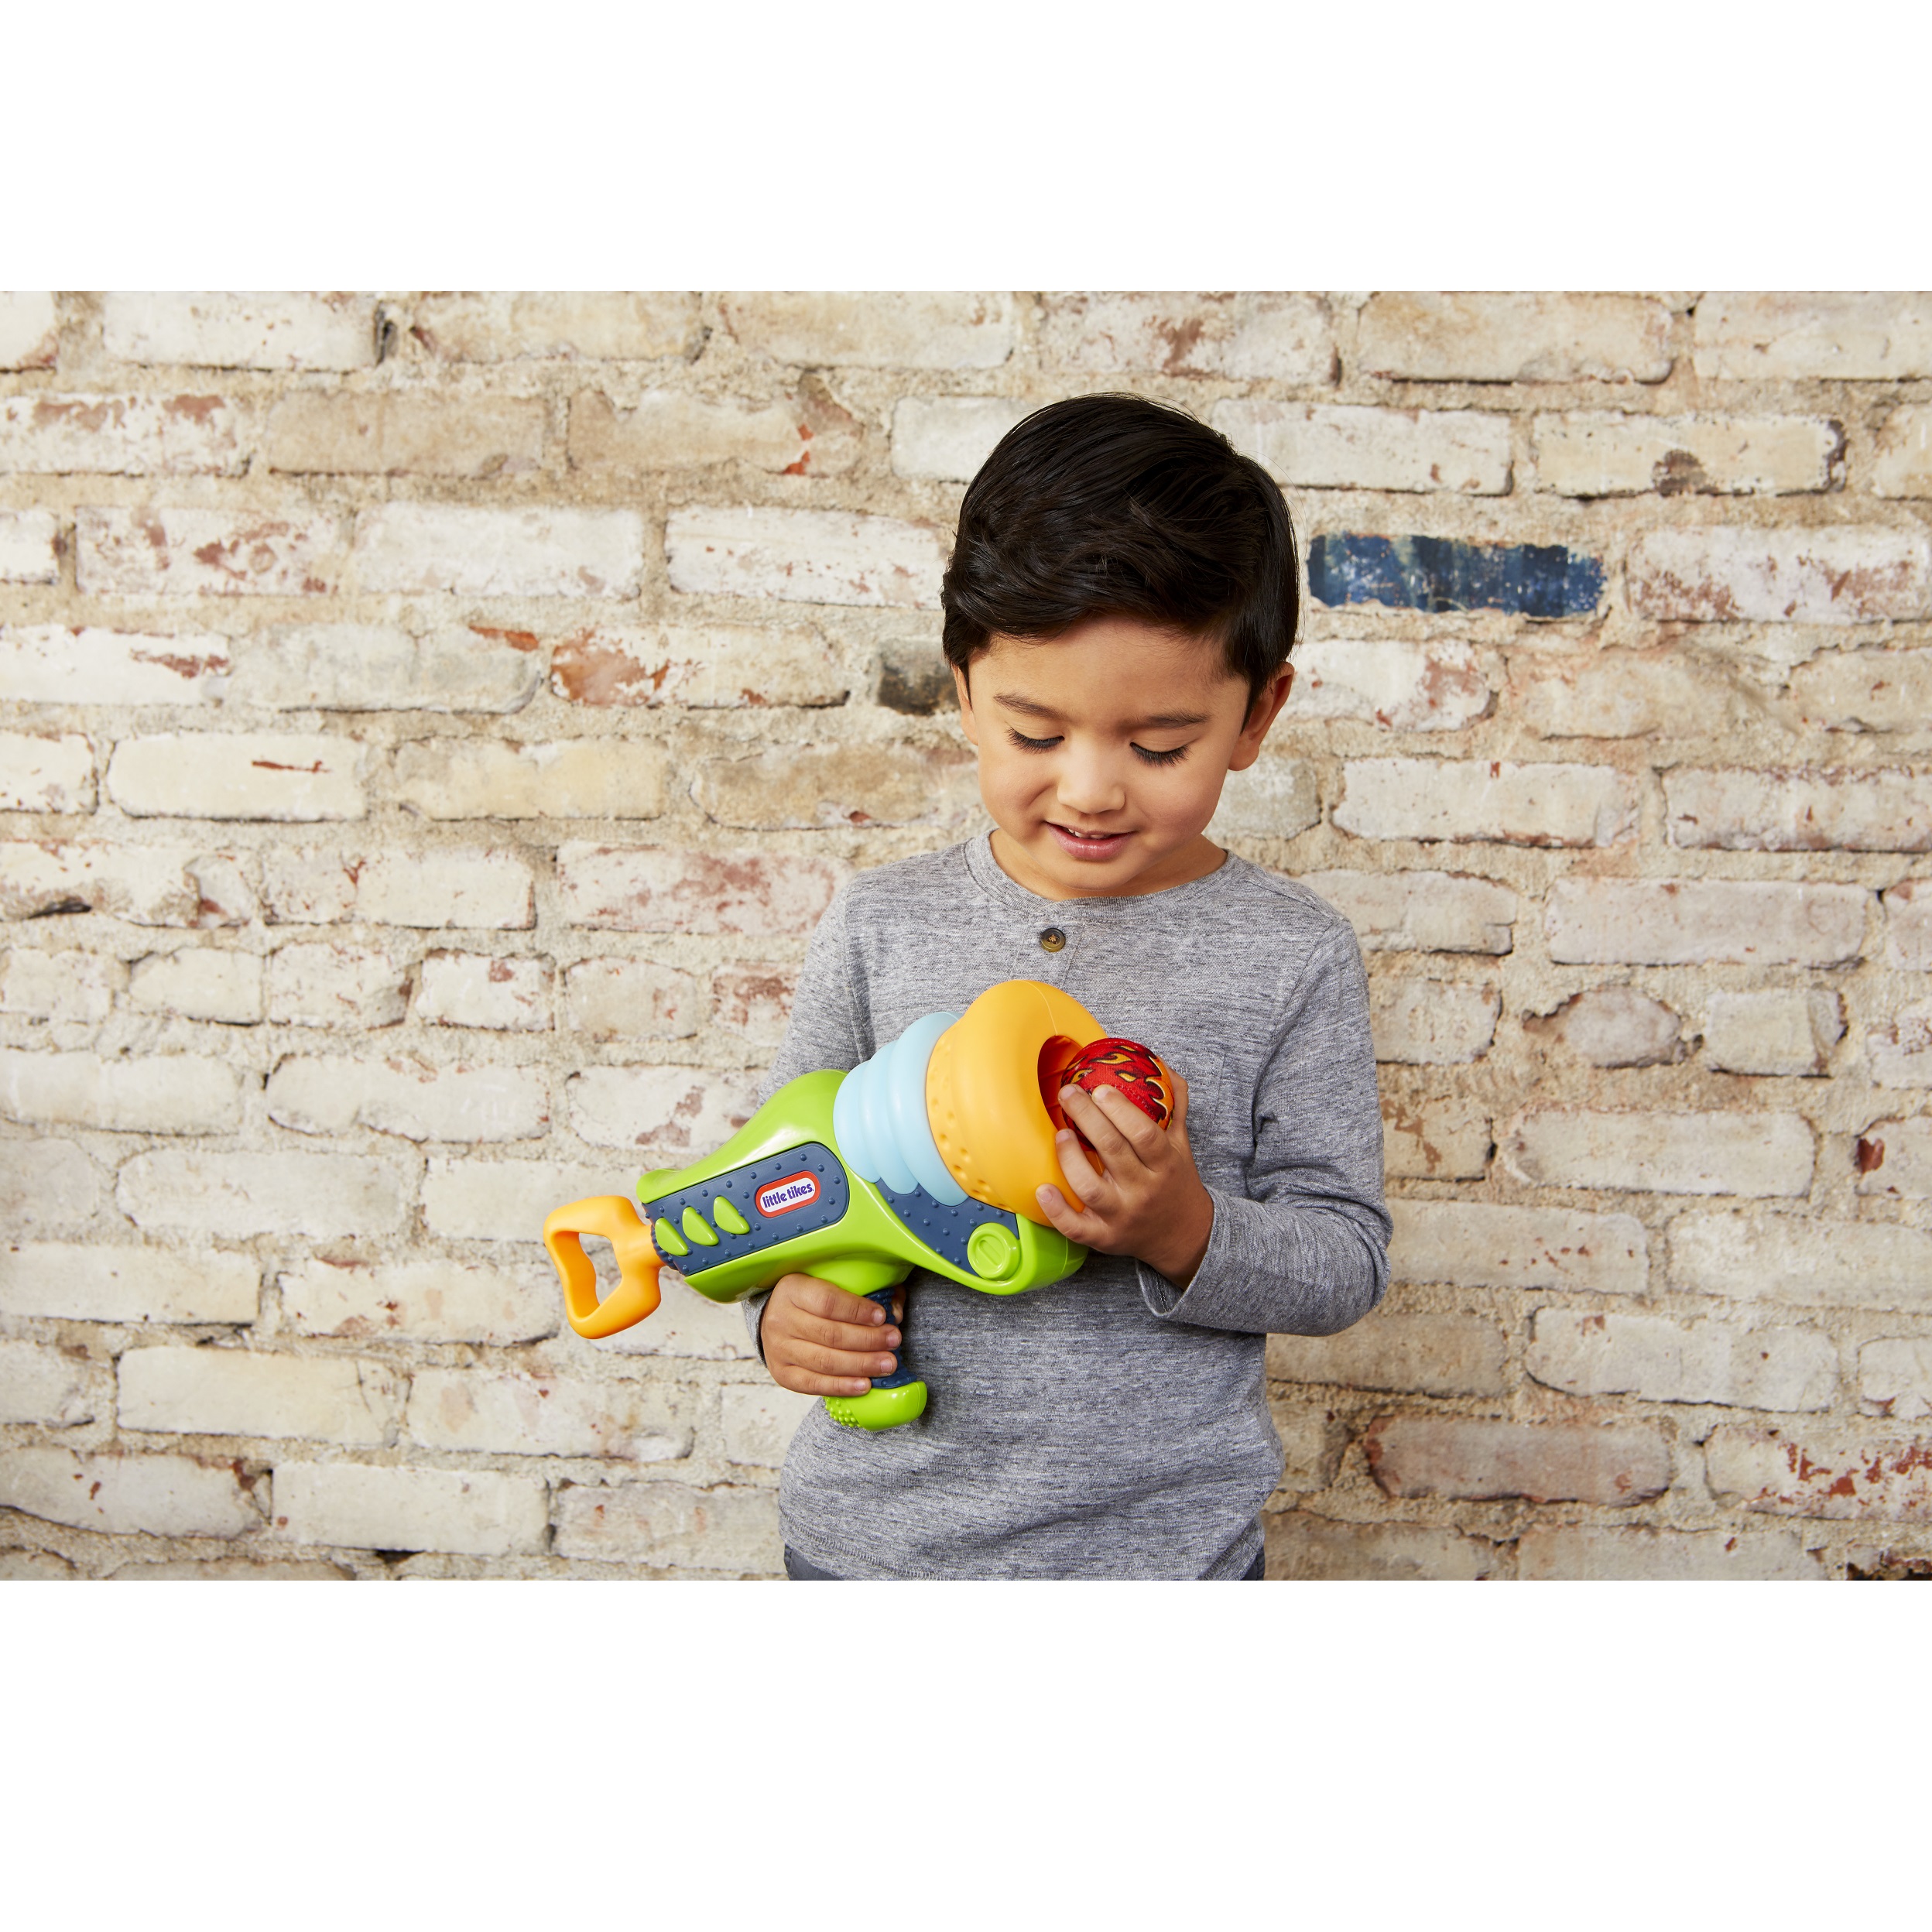 Little Tikes 651250 Mighty Blasters Boom Blaster Toy Blaster with 3 Soft Power Pods - image 3 of 6